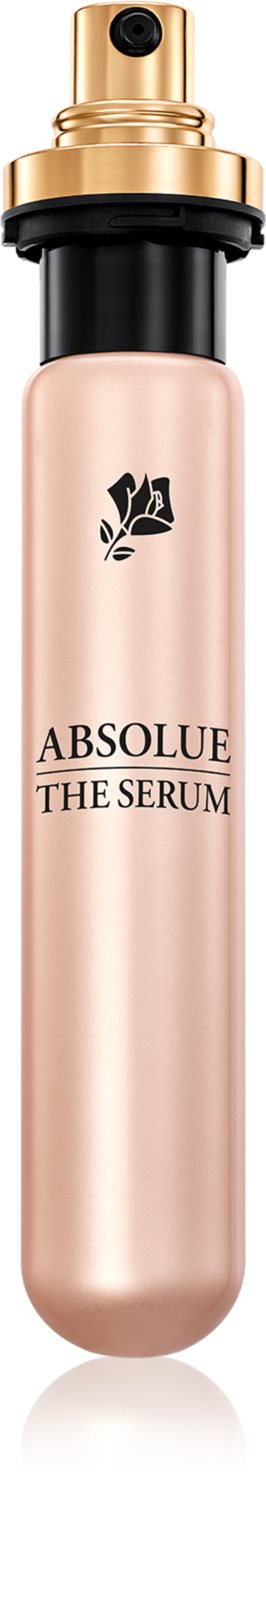 lancome-absolue-the-serum-intensive-concentrate-30-ml-refill